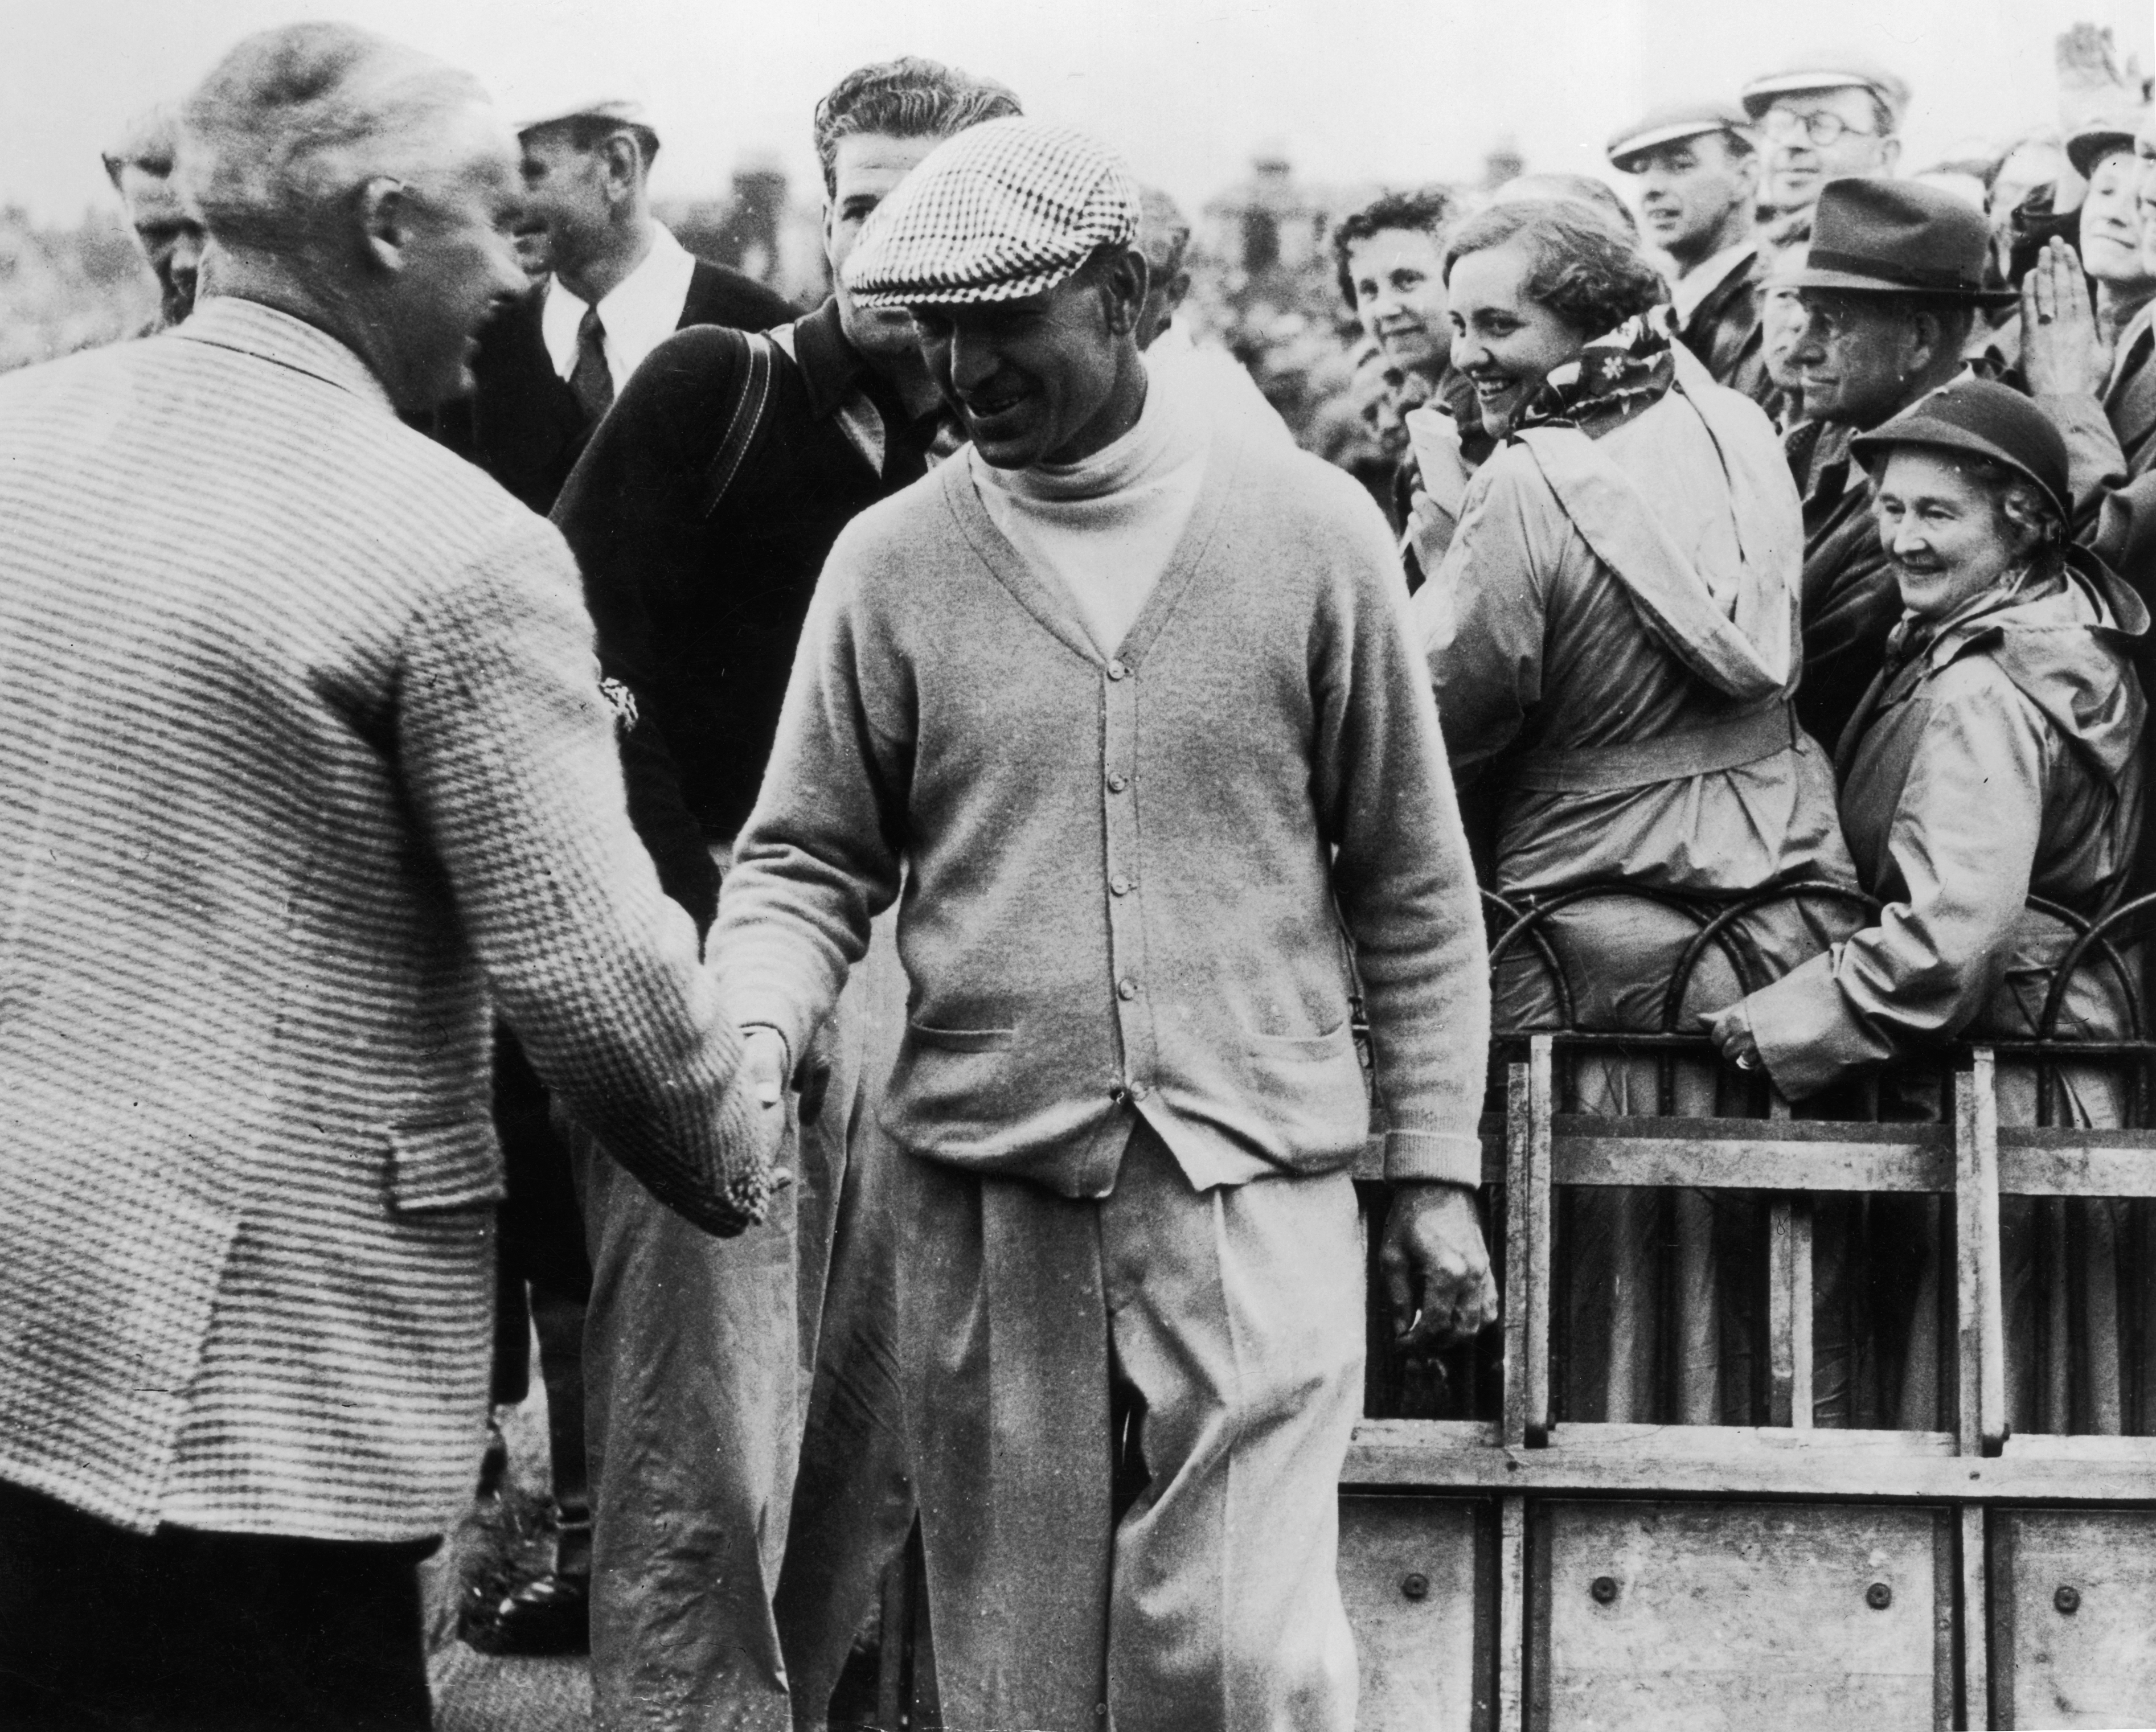 Ben Hogan's career are staggering when adjusted for inflation and today's PGA Tour purses | Golf News and Tour Information | GolfDigest.com